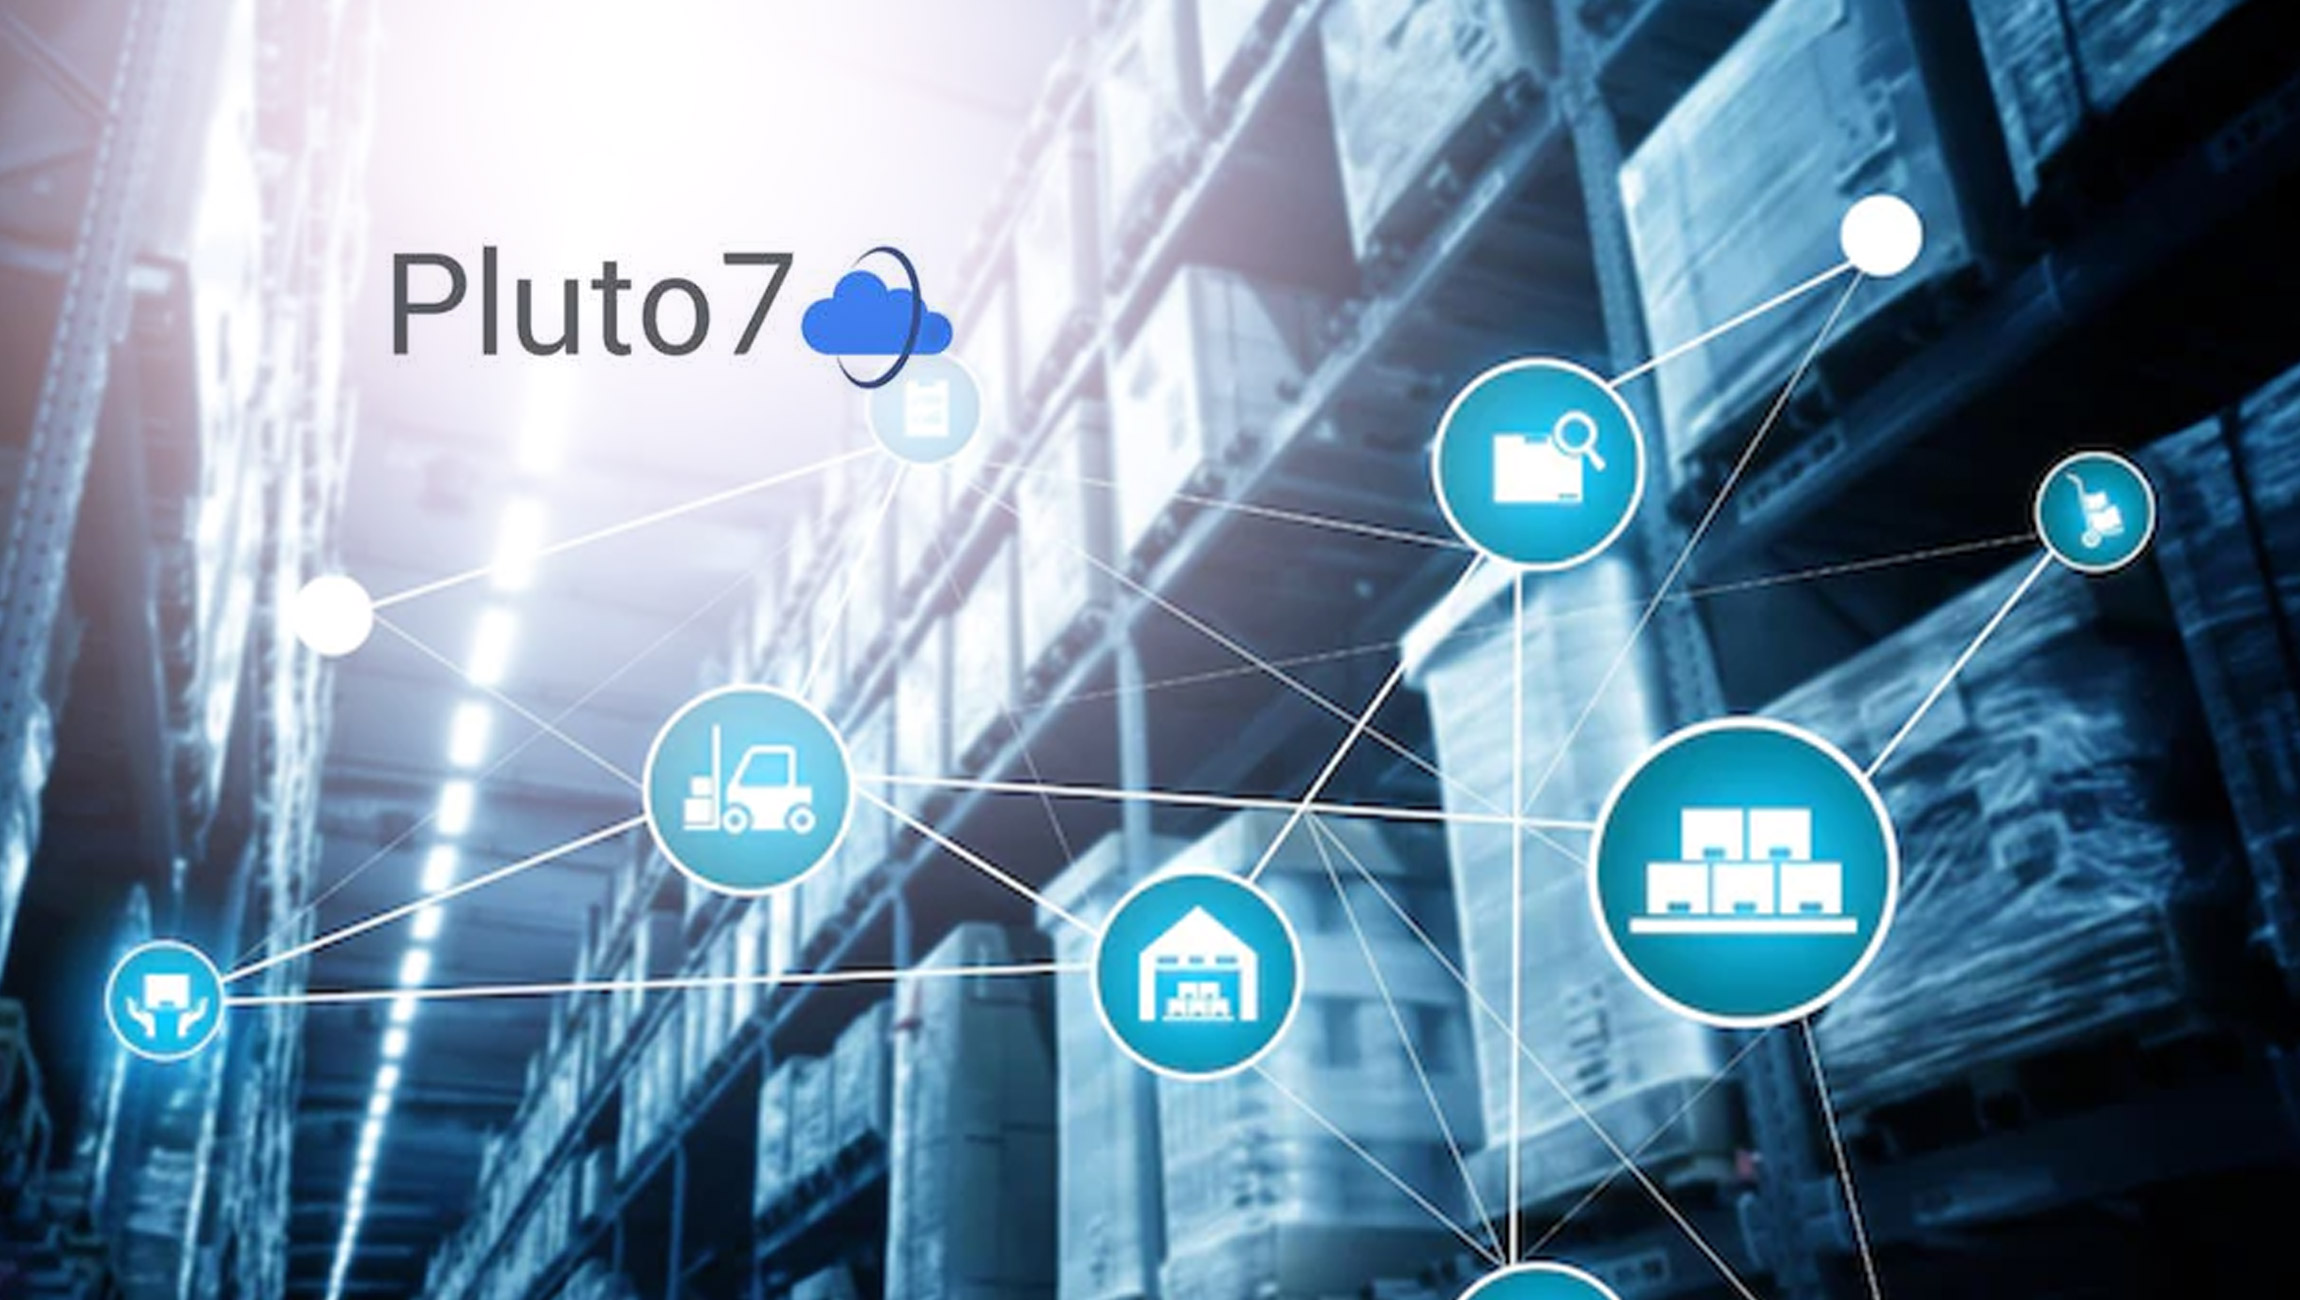 Pluto7 Launches its Click-to-Deploy Solutions Enabling Supply Chain Data and AI Foundation in Just 2 Weeks